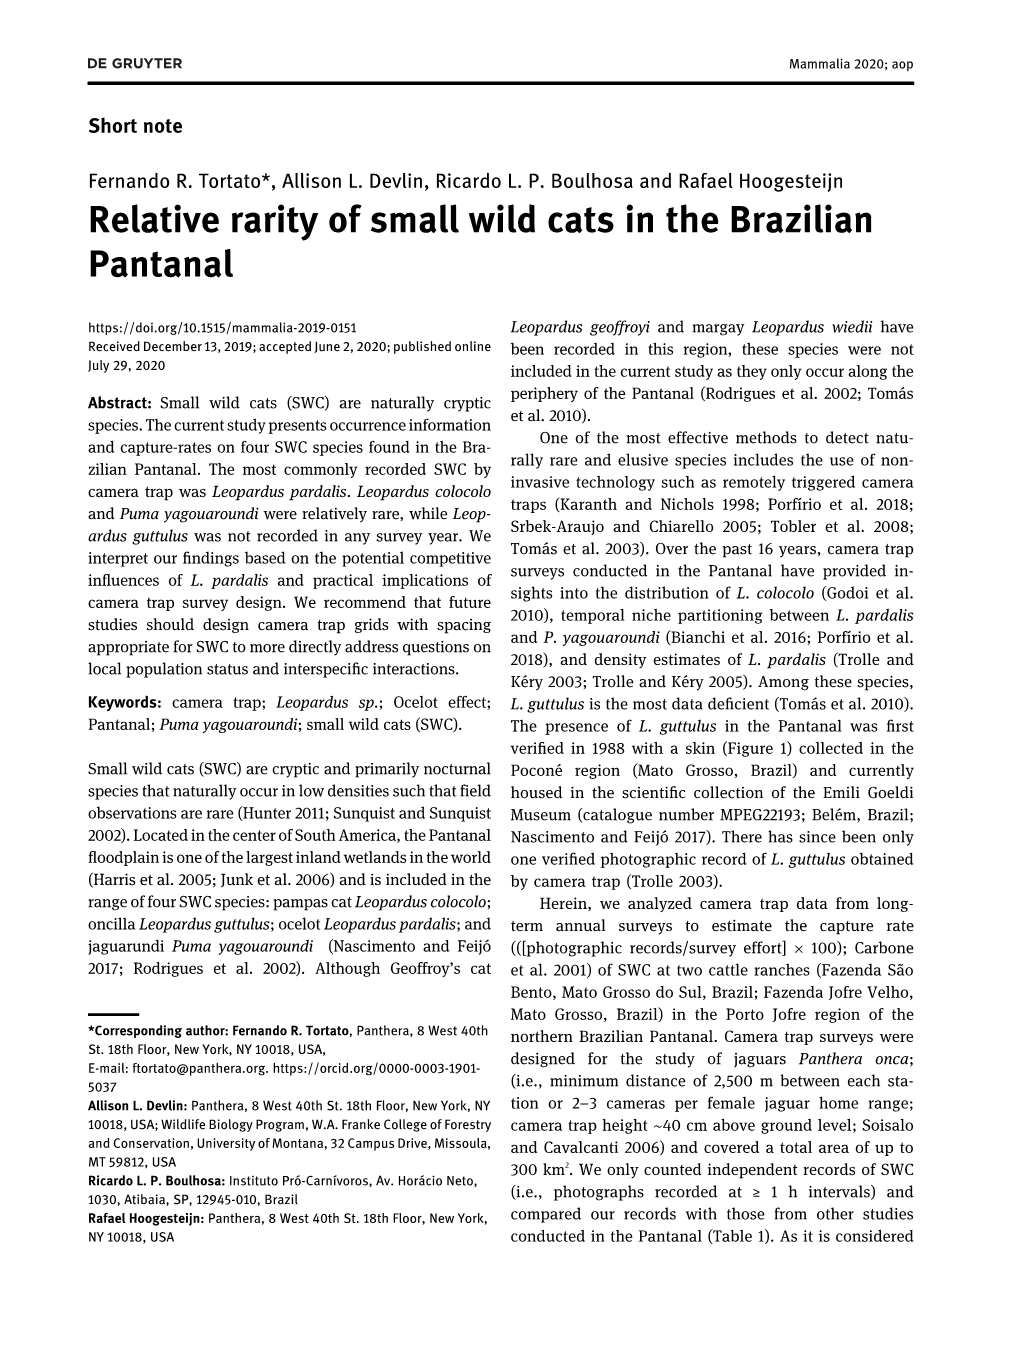 Relative Rarity of Small Wild Cats in the Brazilian Pantanal